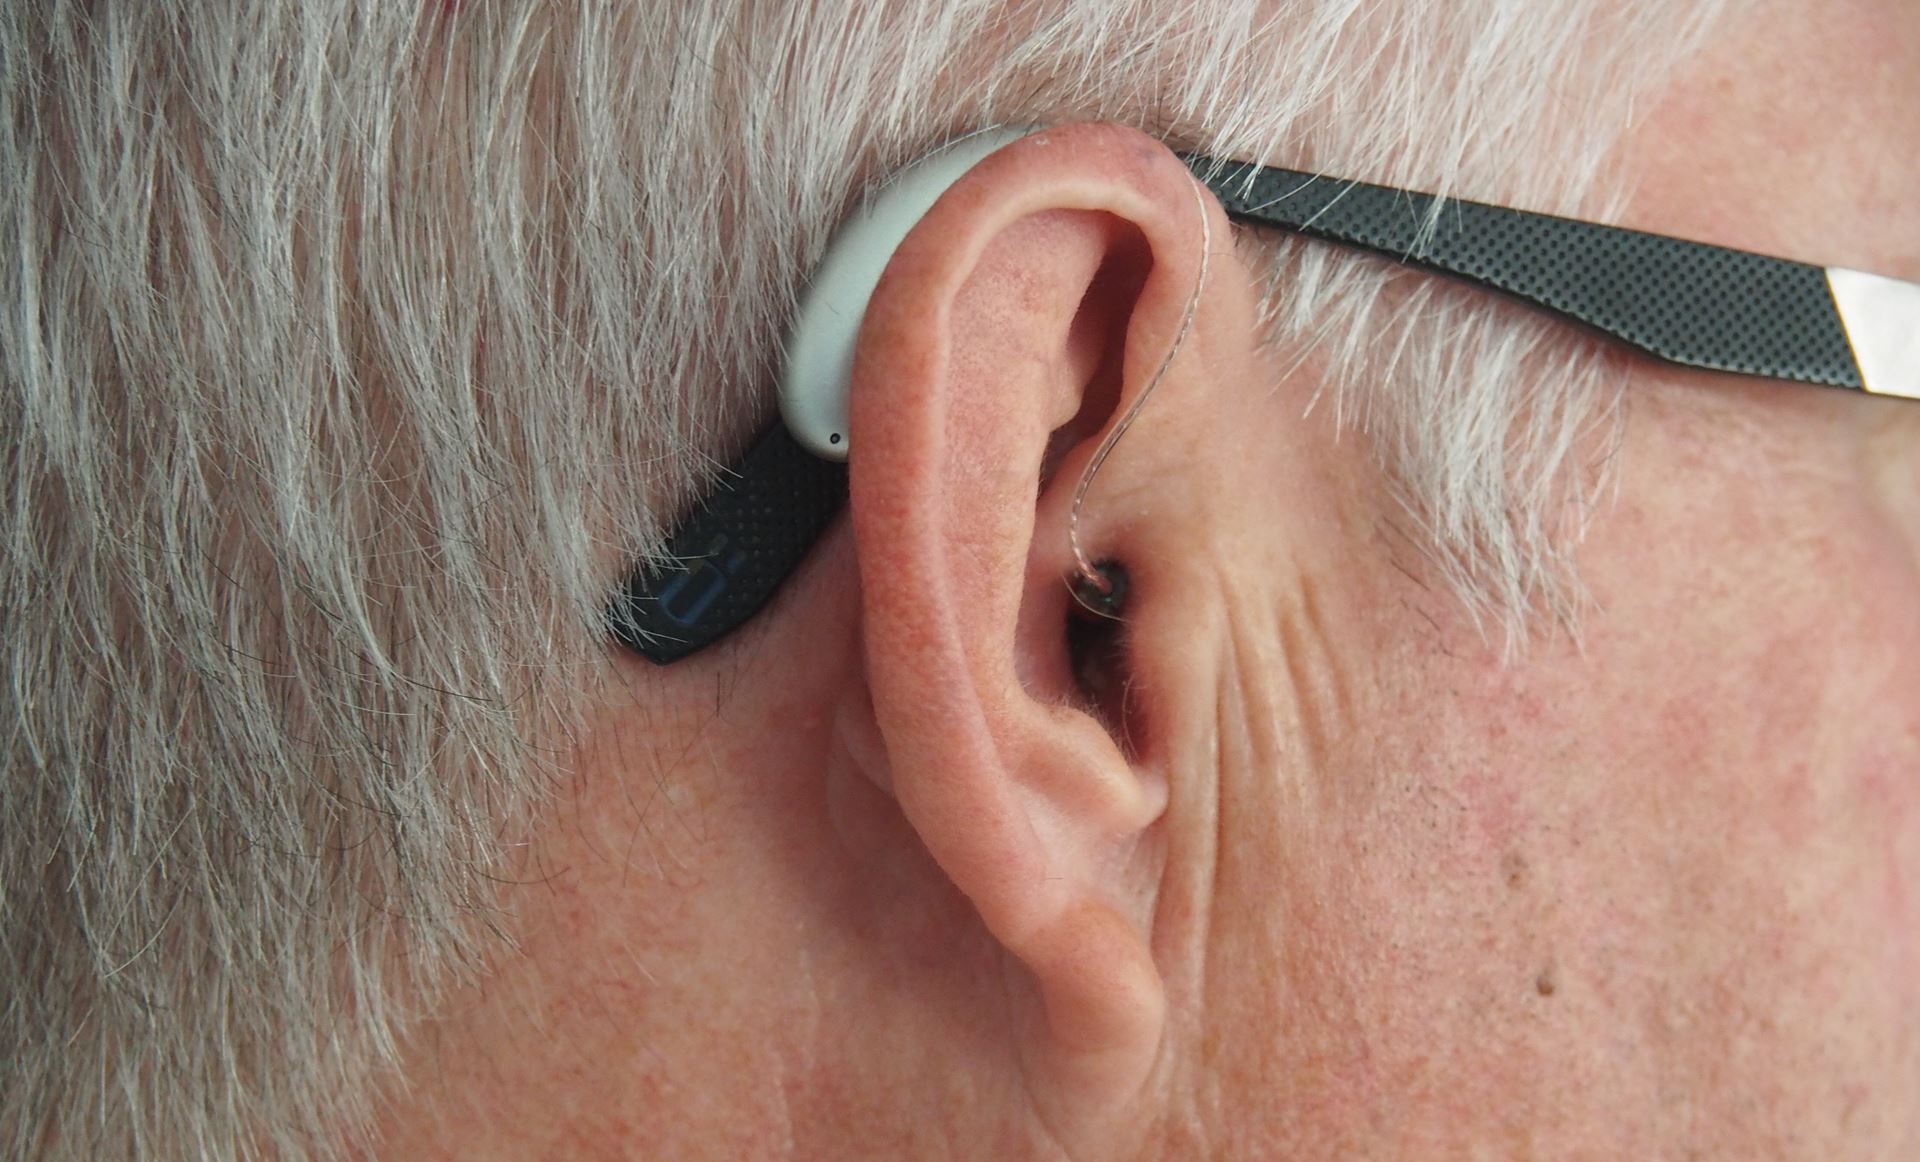 Get your hearing tested